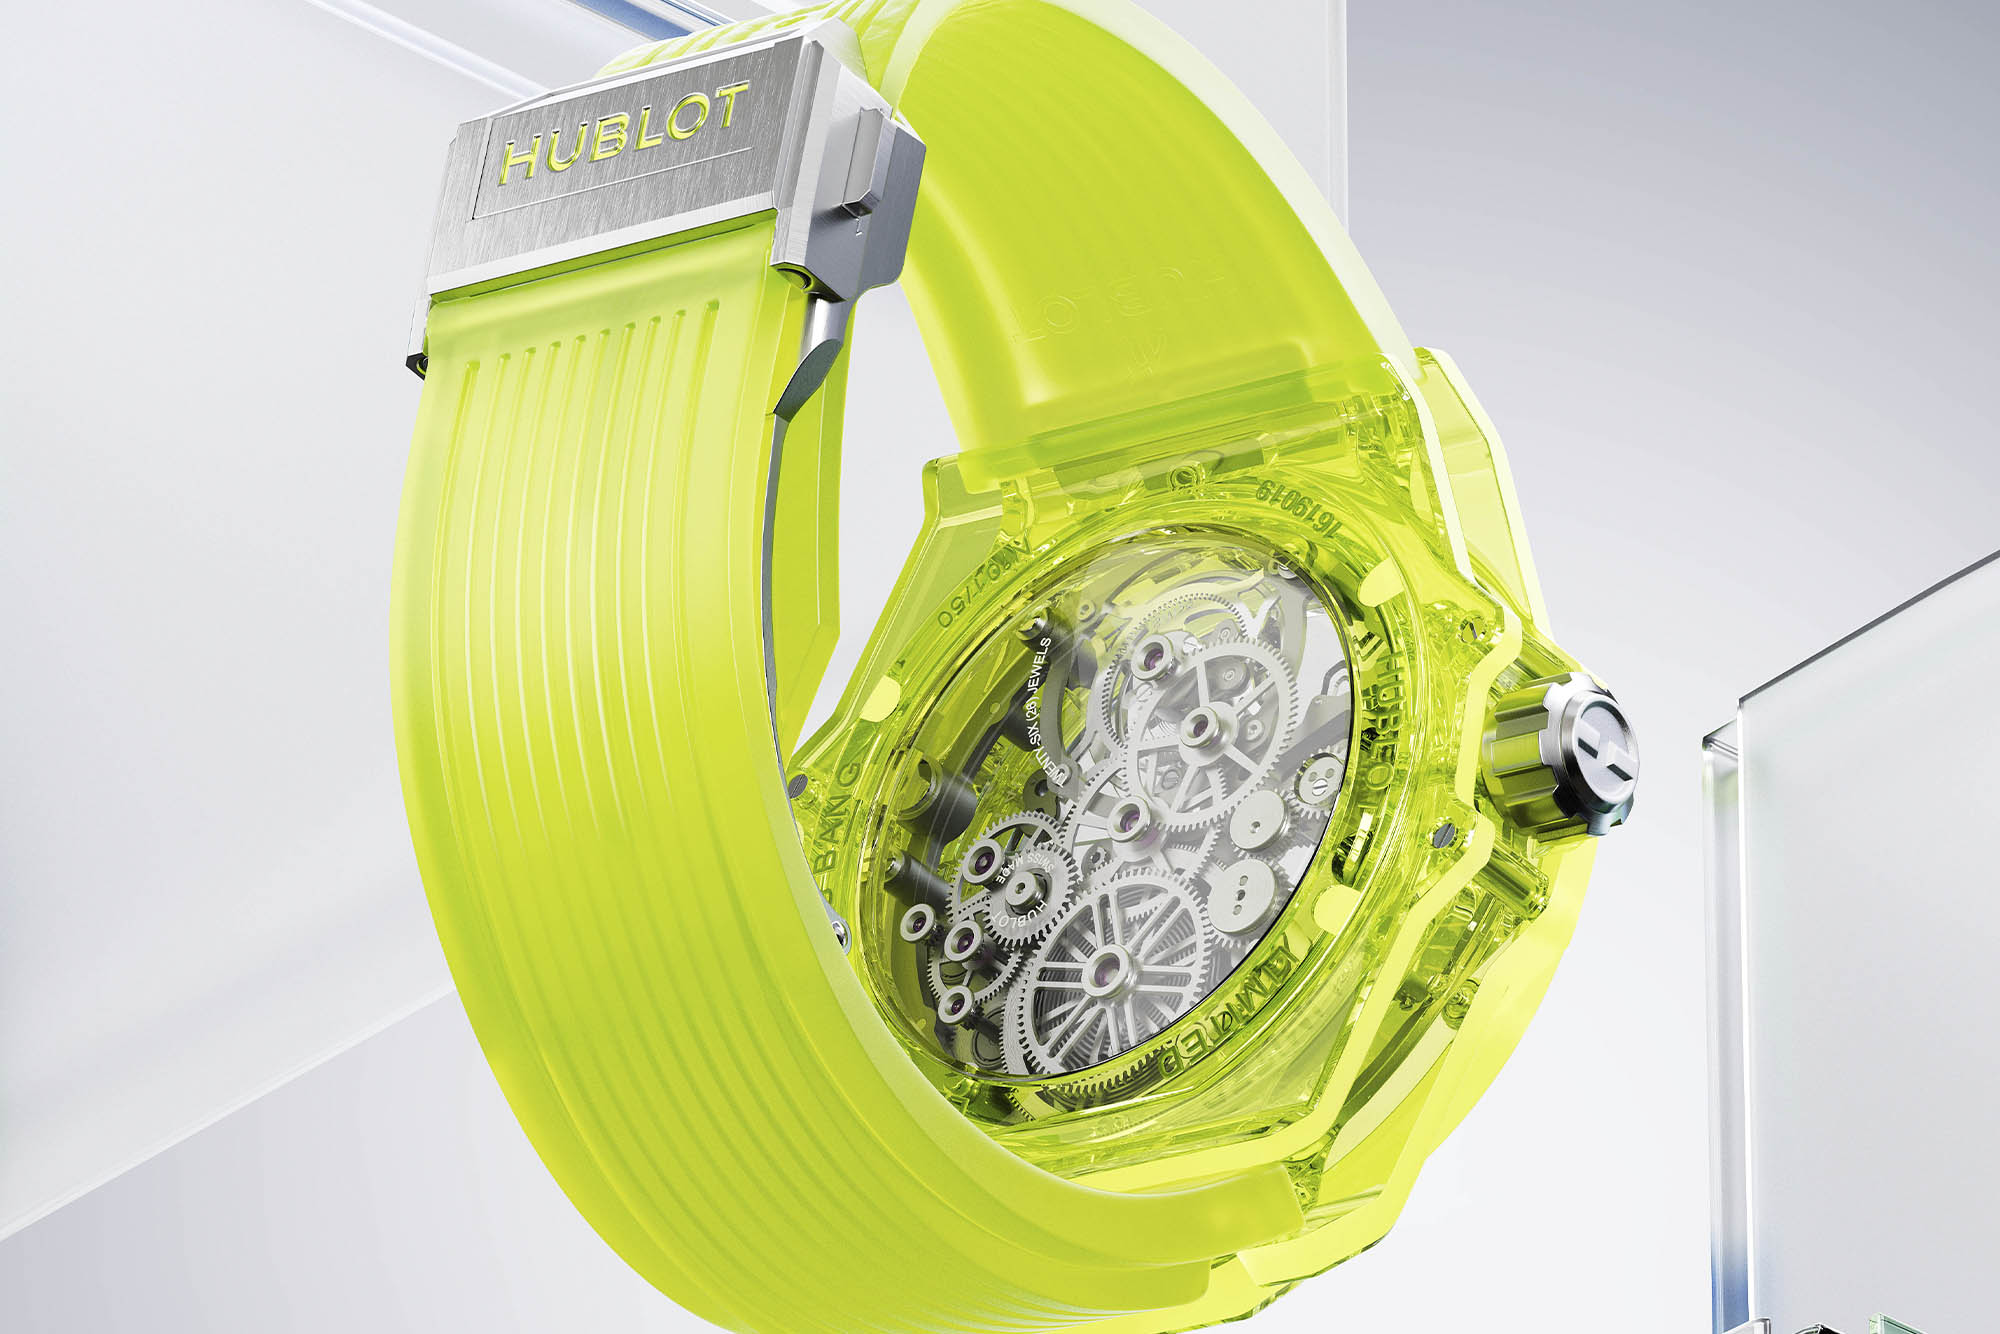 Hublot neon watch from back